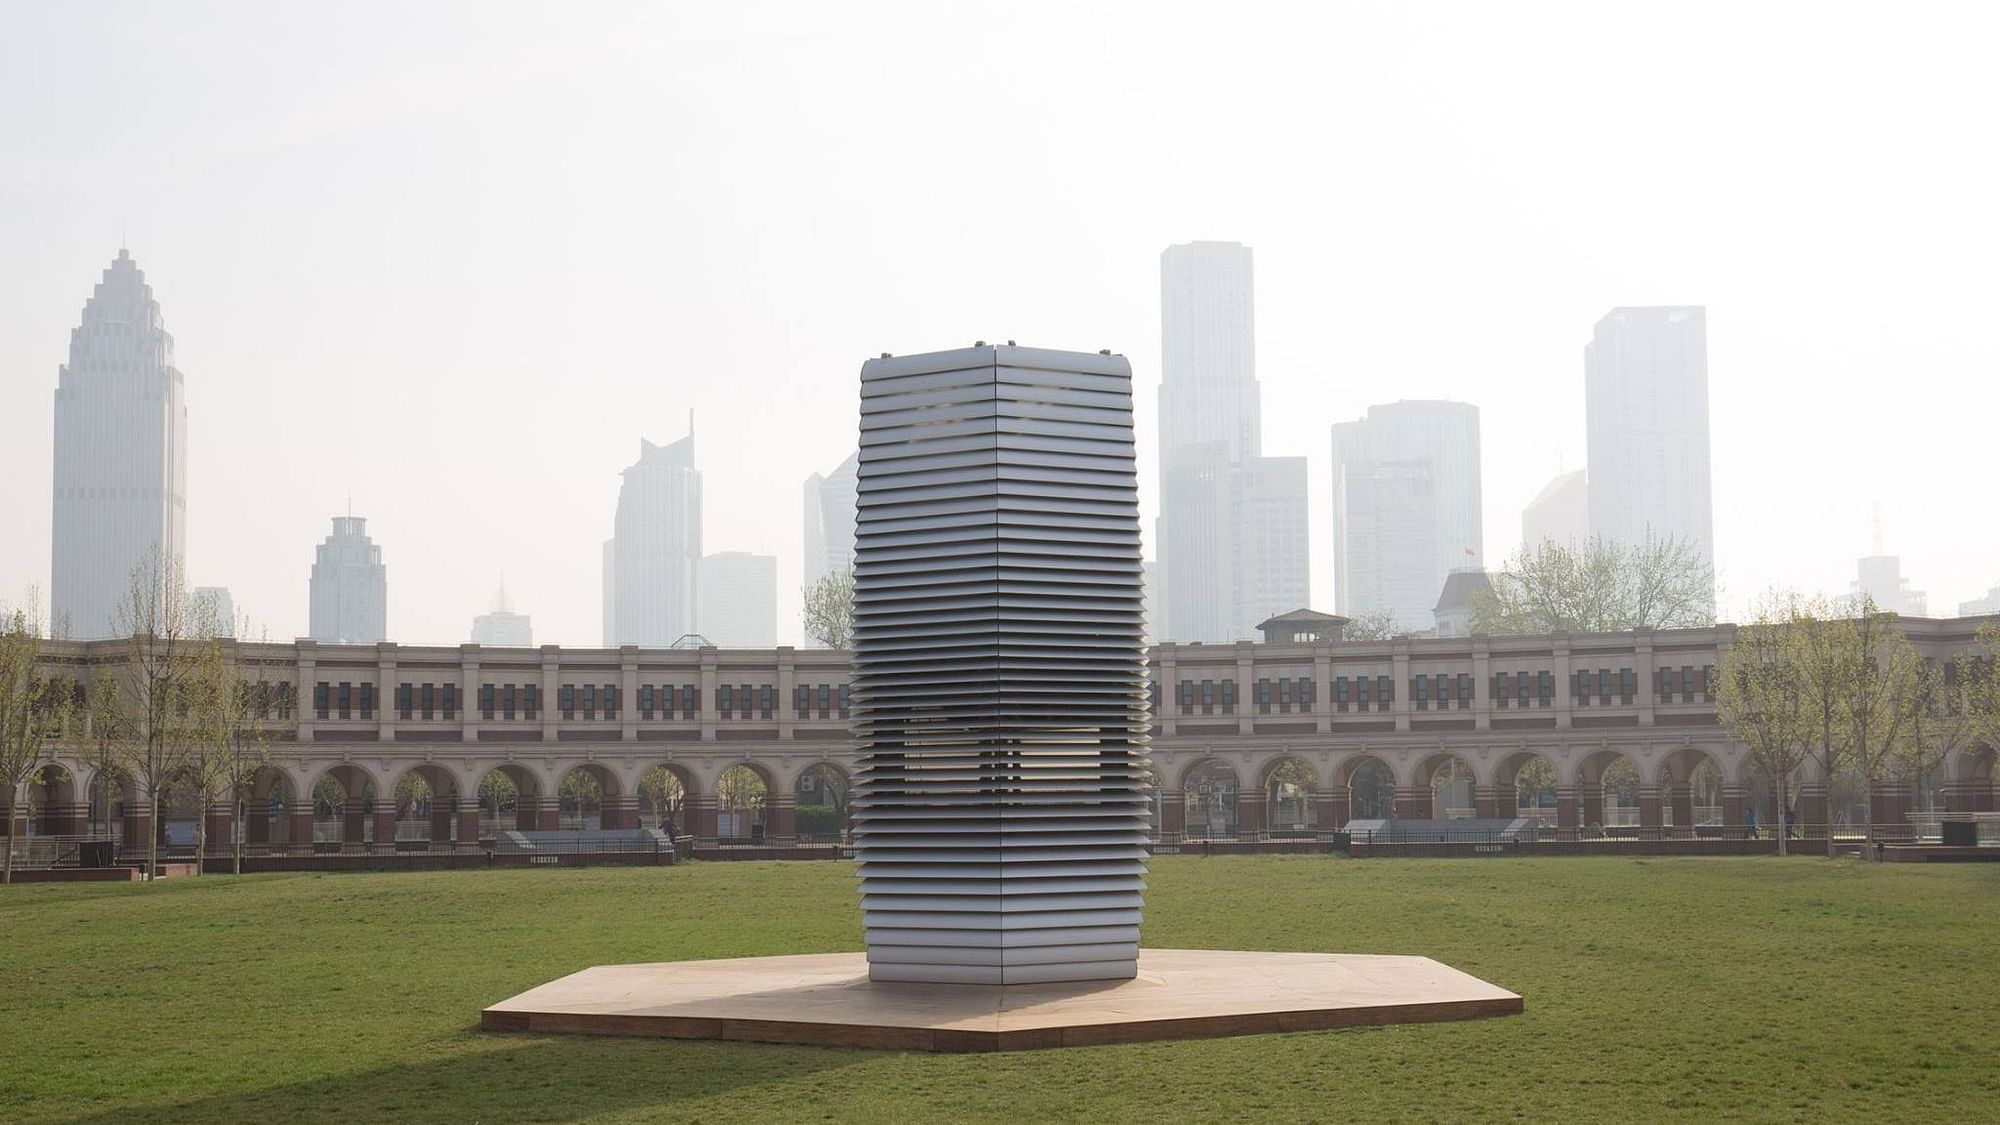 Smog tower in Tianjin, China.